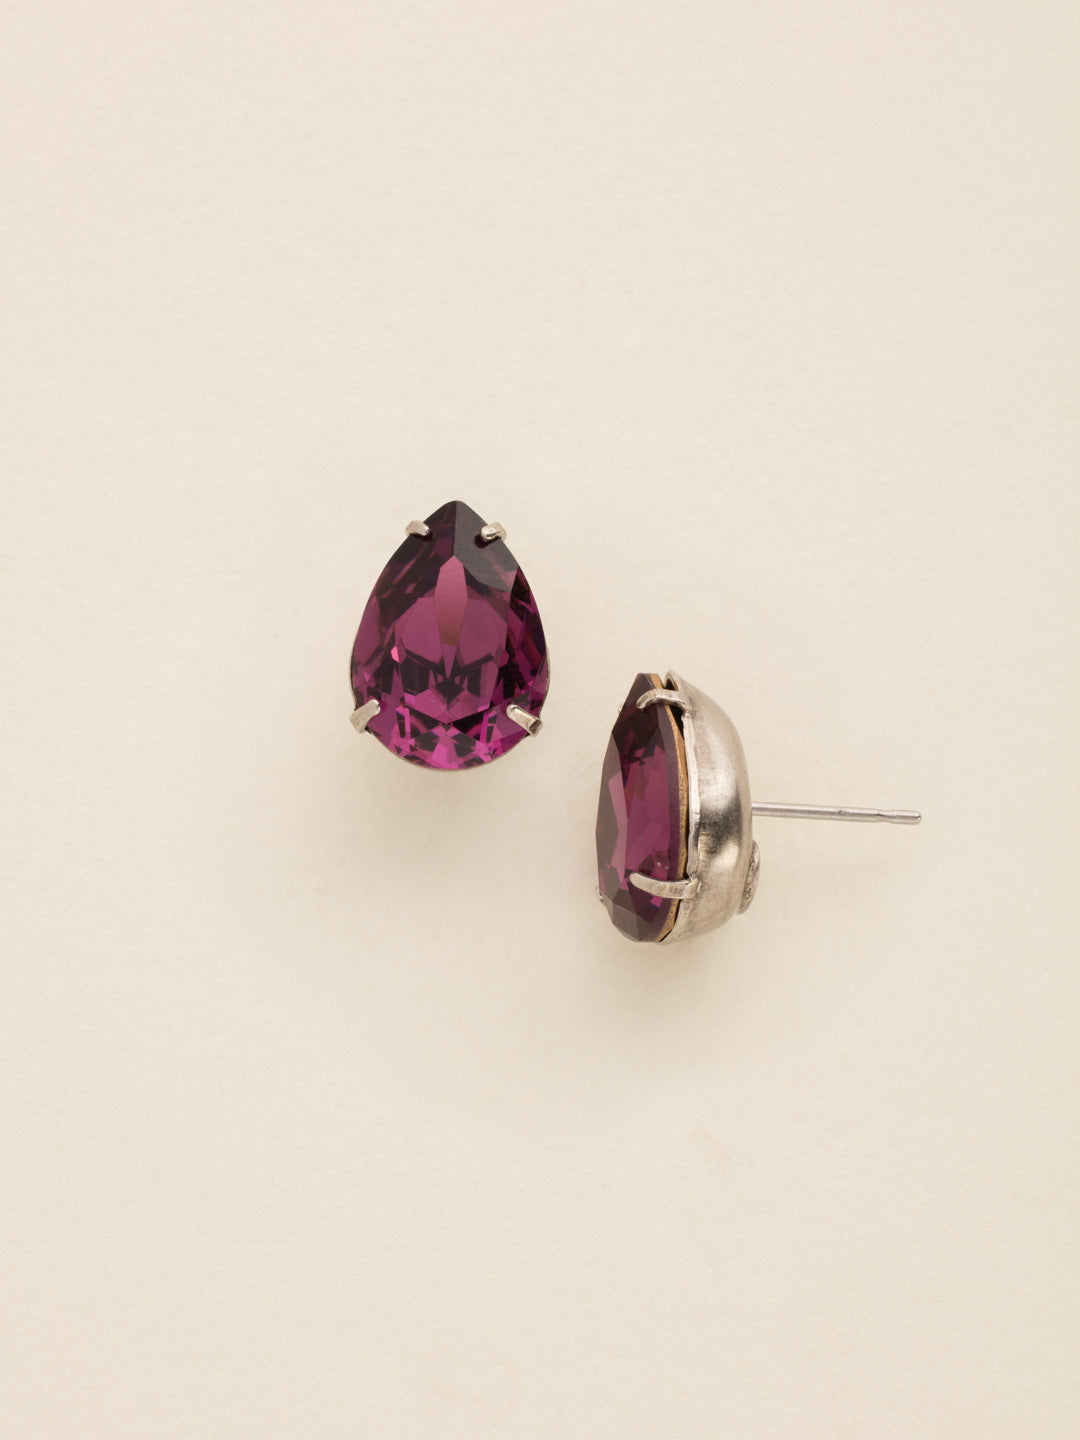 Ginnie Stud Earrings - ECR115ASAFV - <p>A beautiful basic stud. These classic single teardrop post earrings are perfect for any occasion, especially the everyday look. A timeless treasure that will sparkle season after season. From Sorrelli's African Violet collection in our Antique Silver-tone finish.</p>